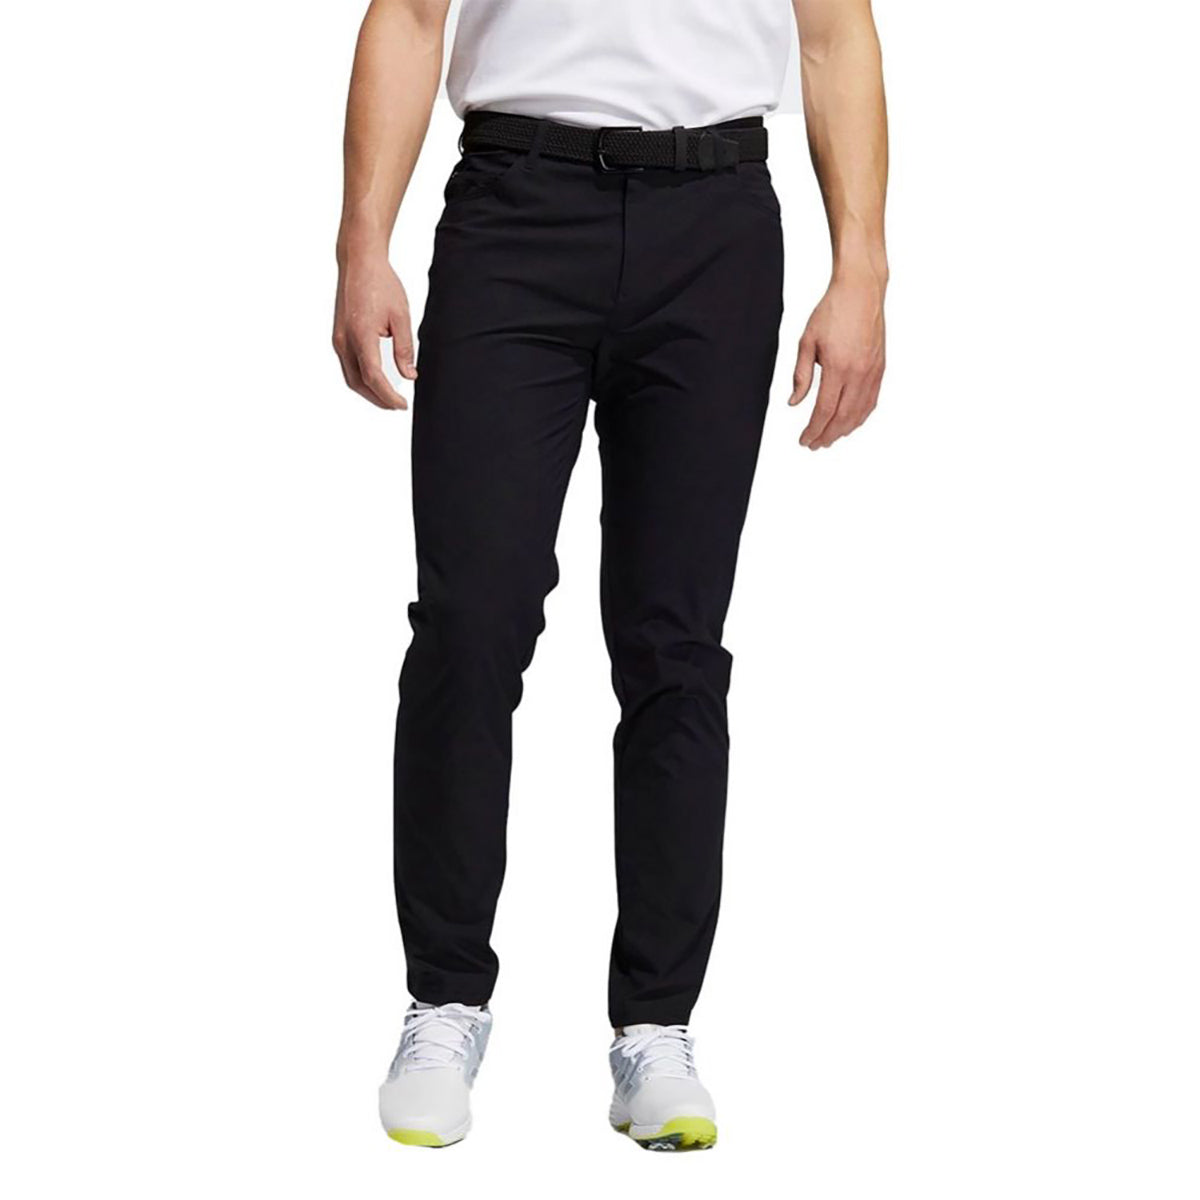 Image of adidas Men's Go-To Five Pocket Pant